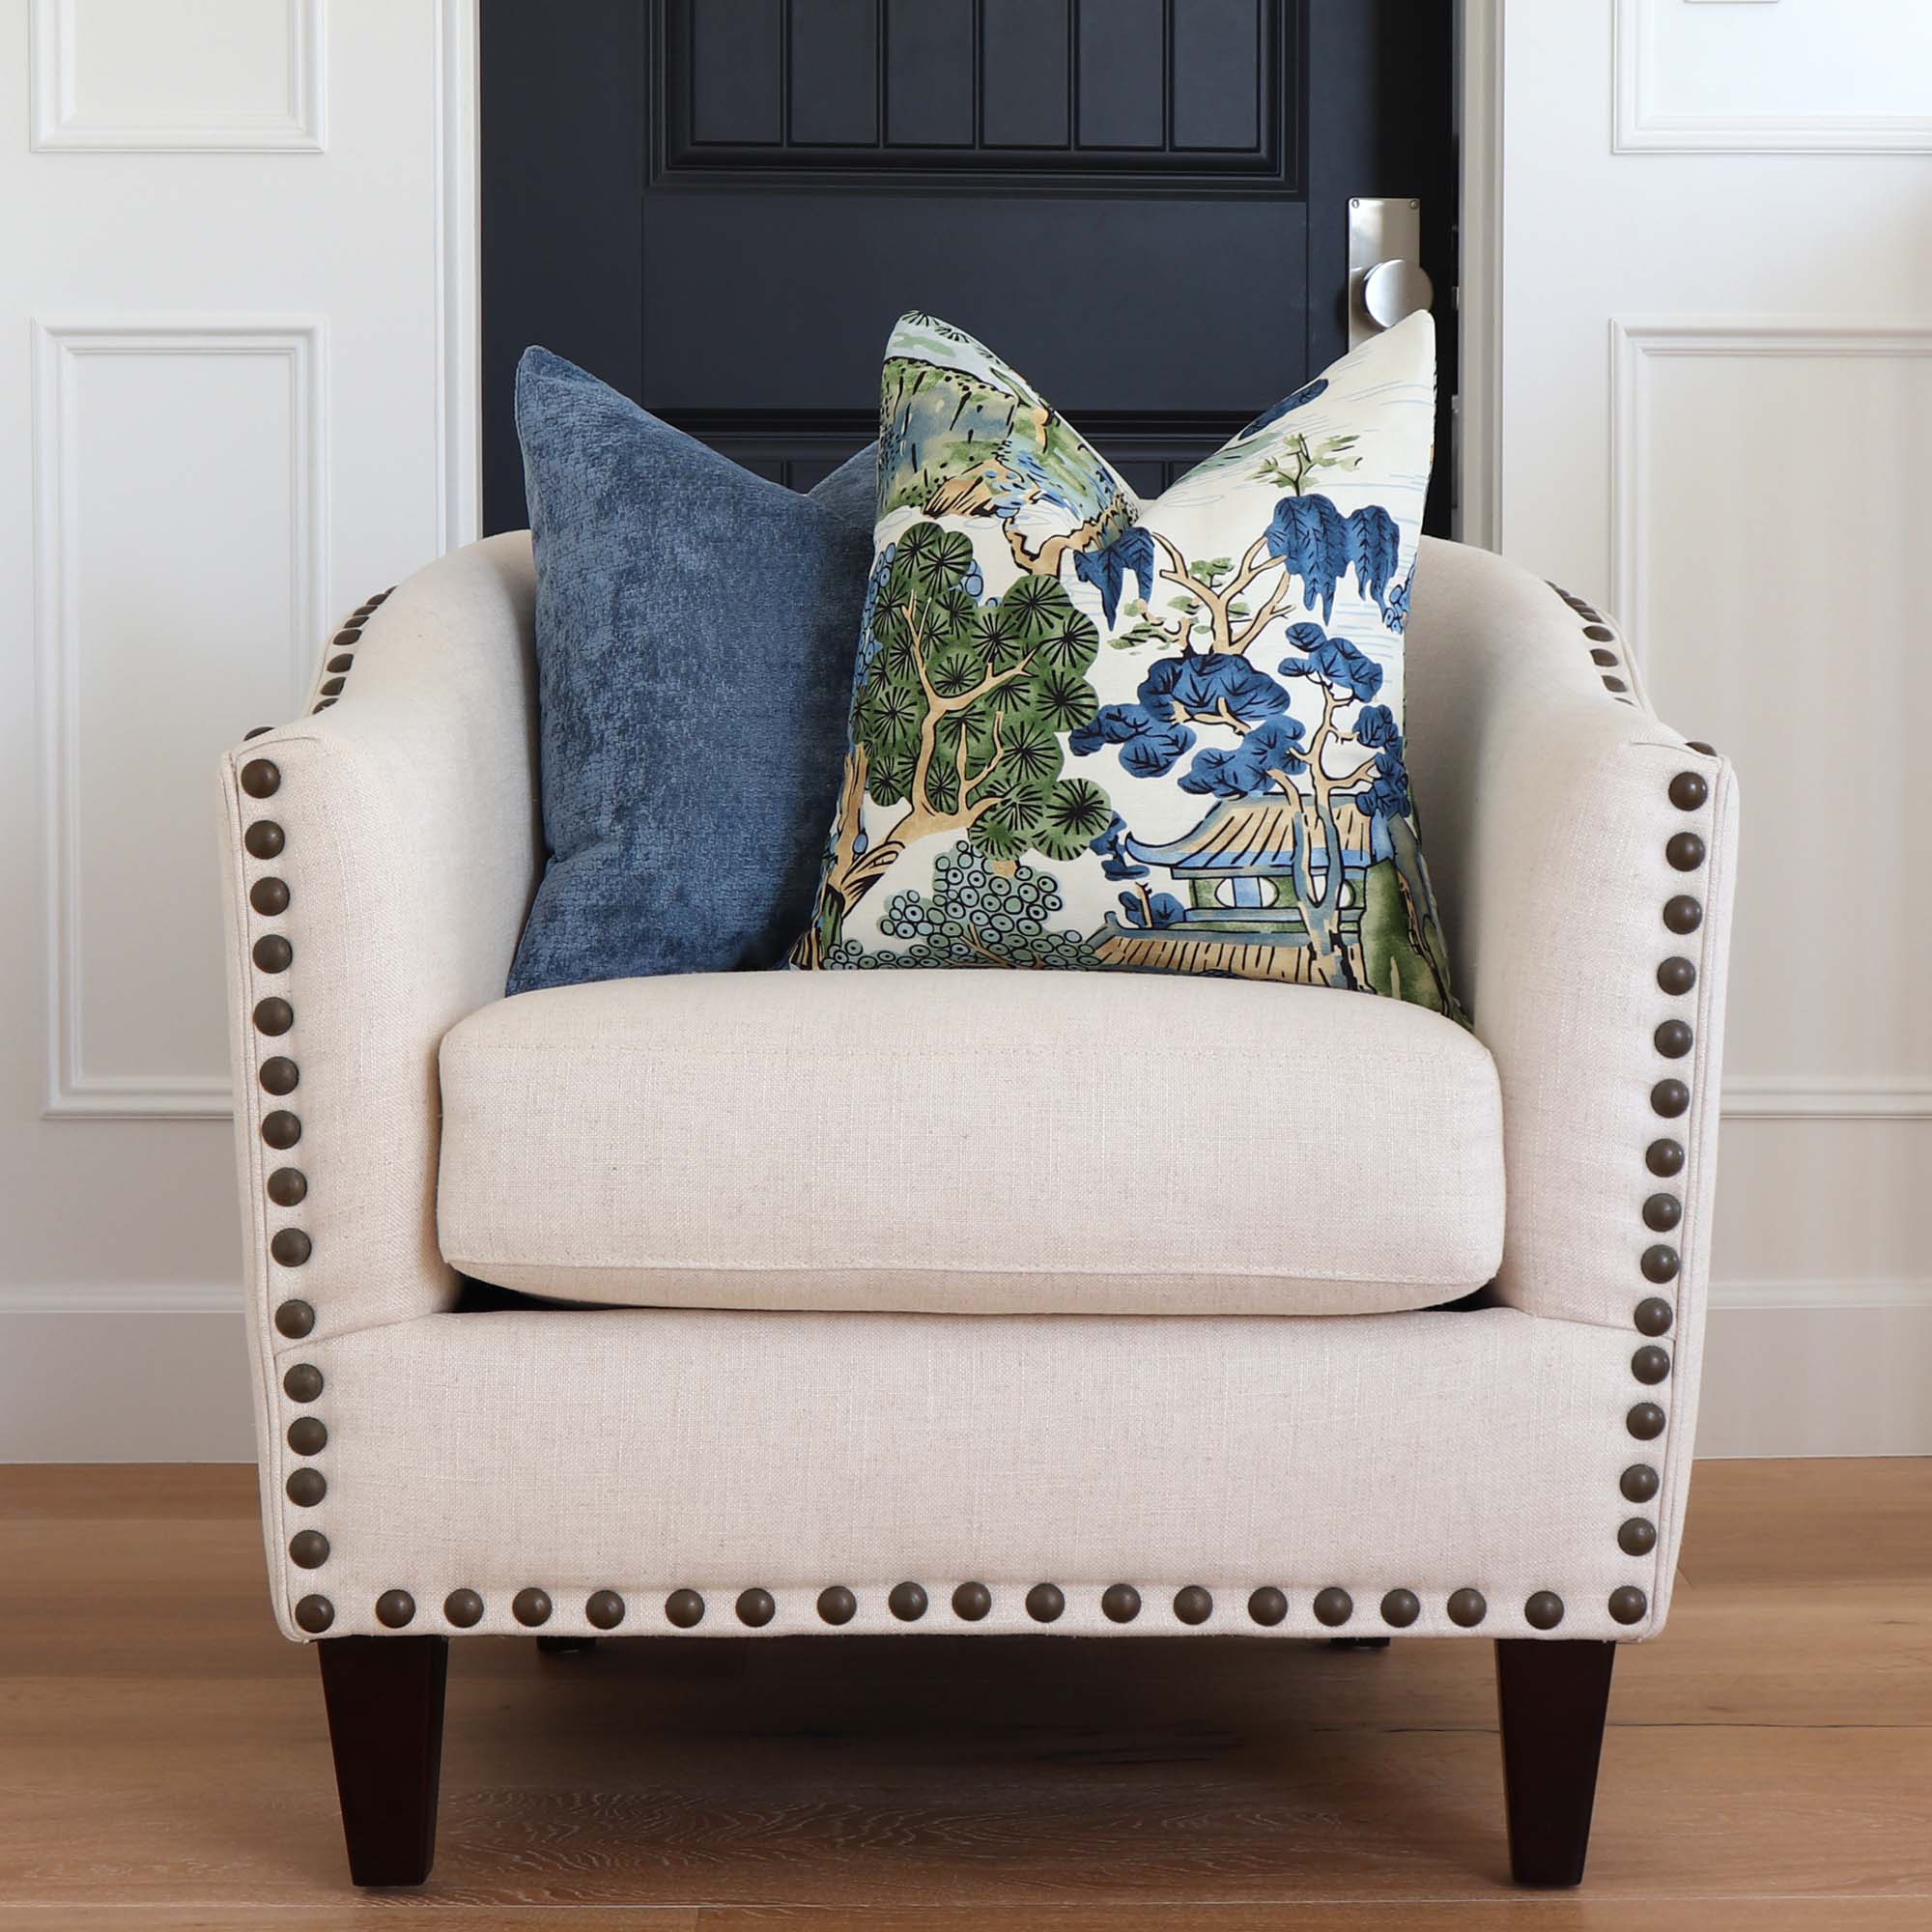 https://www.chloeandolive.com/cdn/shop/products/Thibaut-Asian-Scenic-Chinoiserie-Blue-Green-Designer-Luxury-Decorative-Throw-Pillow-Cover-on-Accent-Chair-in-Home-Decor_5000x.jpg?v=1648958836